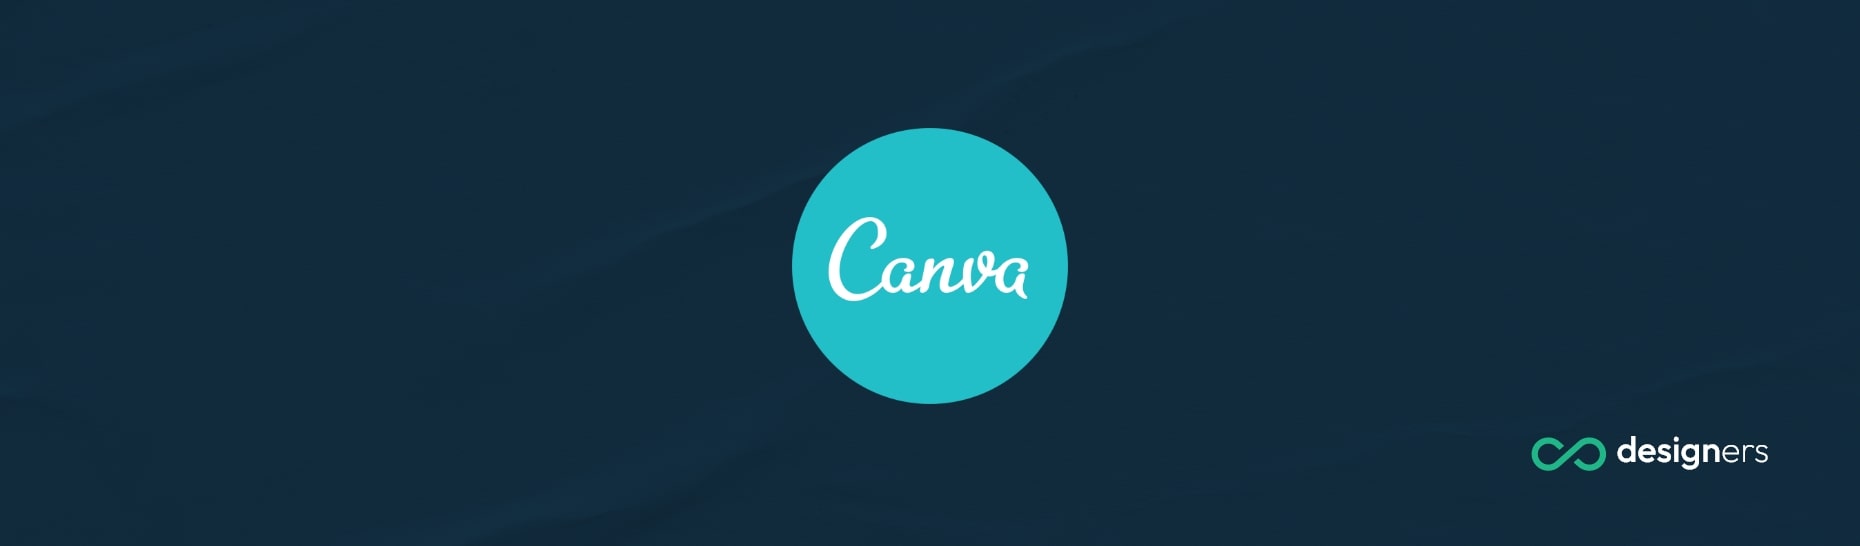 What Is a Letterhead on Canva?